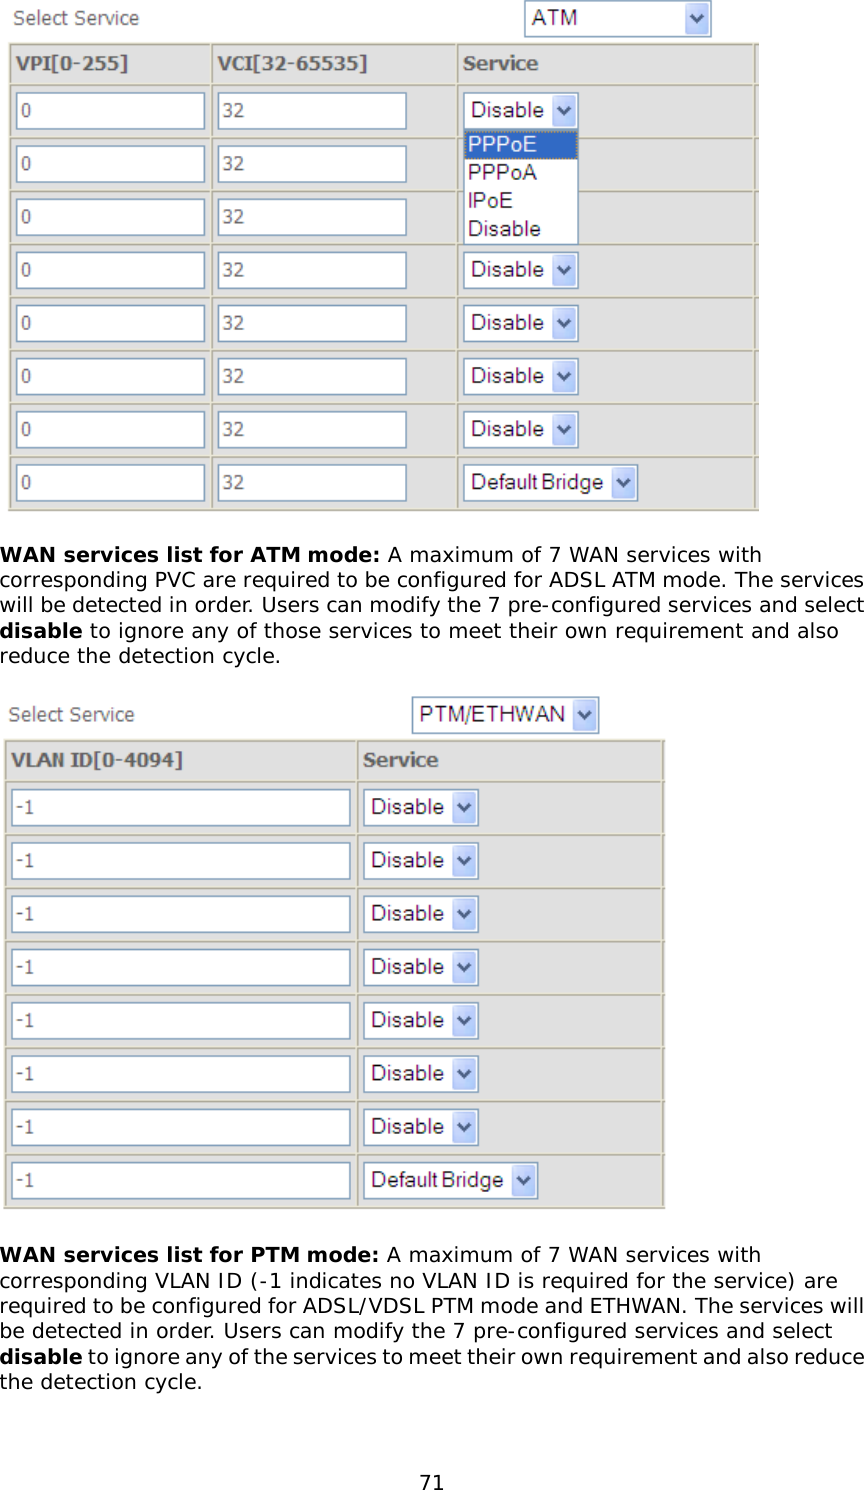  71   WAN services list for ATM mode: A maximum of 7 WAN services with corresponding PVC are required to be configured for ADSL ATM mode. The services will be detected in order. Users can modify the 7 pre-configured services and select disable to ignore any of those services to meet their own requirement and also reduce the detection cycle.    WAN services list for PTM mode: A maximum of 7 WAN services with corresponding VLAN ID (-1 indicates no VLAN ID is required for the service) are required to be configured for ADSL/VDSL PTM mode and ETHWAN. The services will be detected in order. Users can modify the 7 pre-configured services and select disable to ignore any of the services to meet their own requirement and also reduce the detection cycle.  